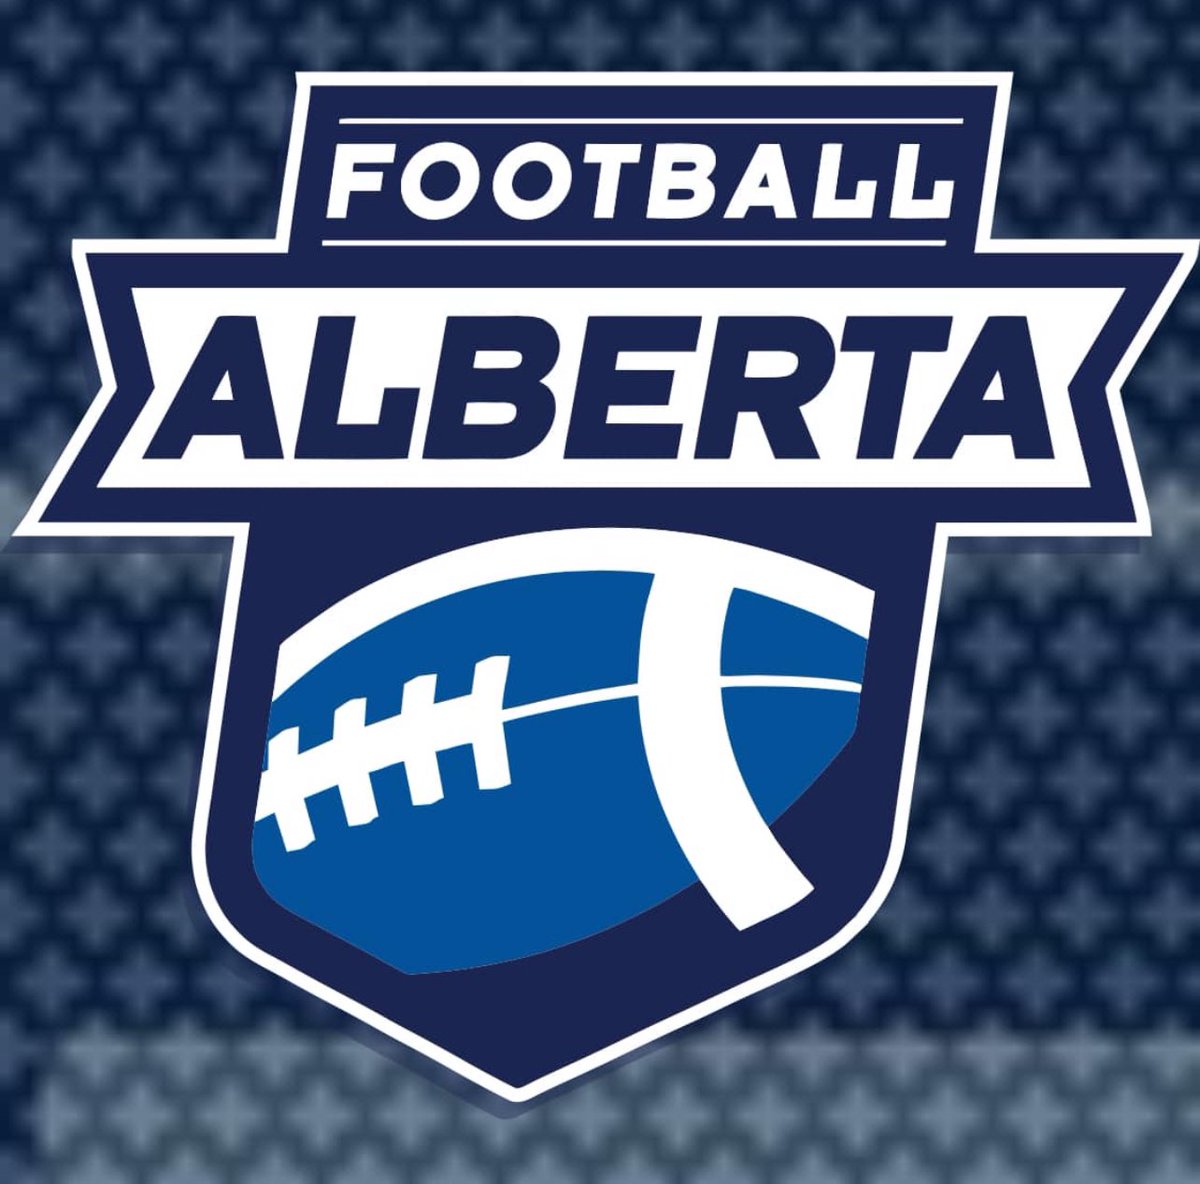 So thankful to have made the top 68 for U17 team Alberta! Ready to Represent @ShepHighSchool